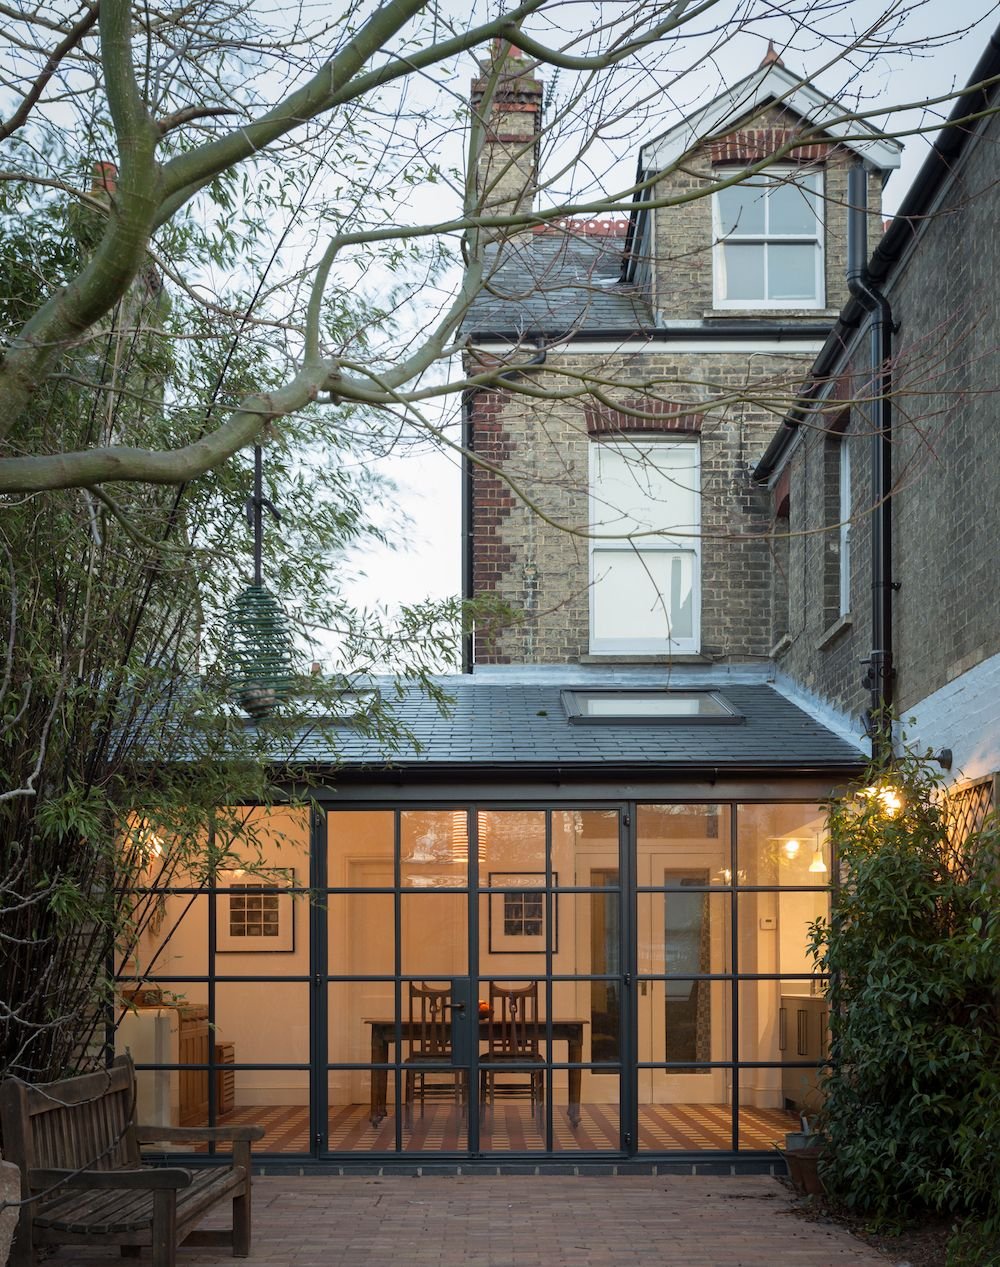 Before & After: How Architects Breathed New Life Into A Dated Victorian Property